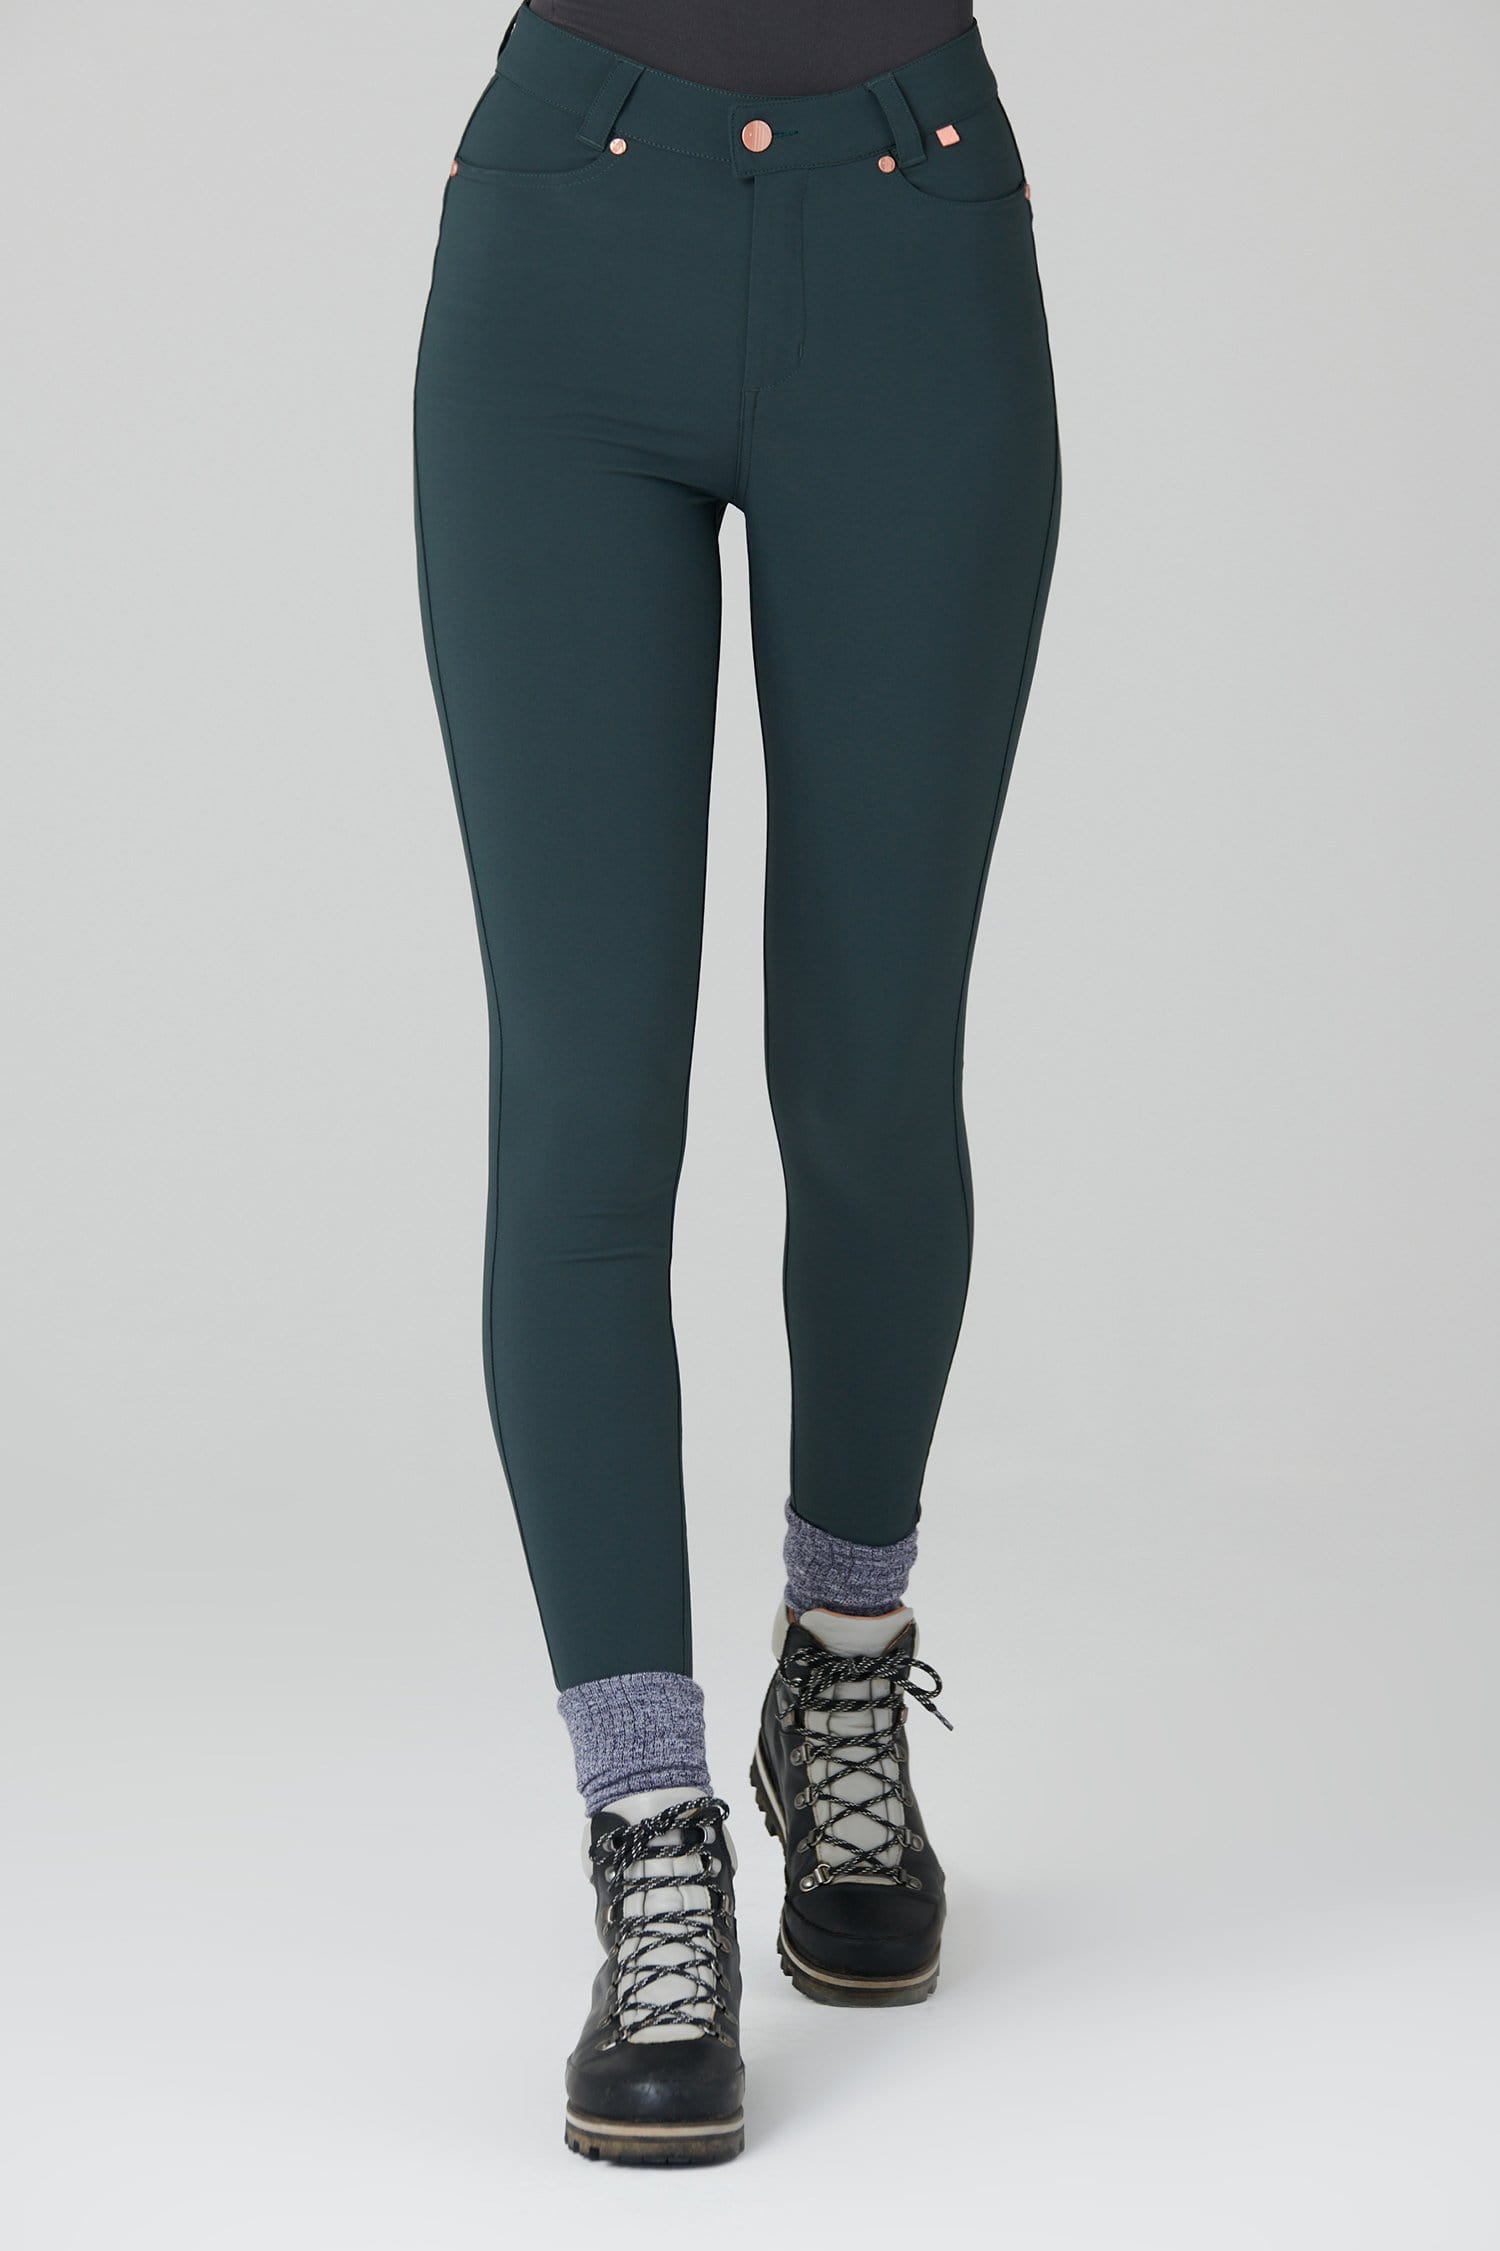 Thermal Skinny Outdoor Trousers - Forest Green - 30l / Uk12 - Womens - Acai Outdoorwear